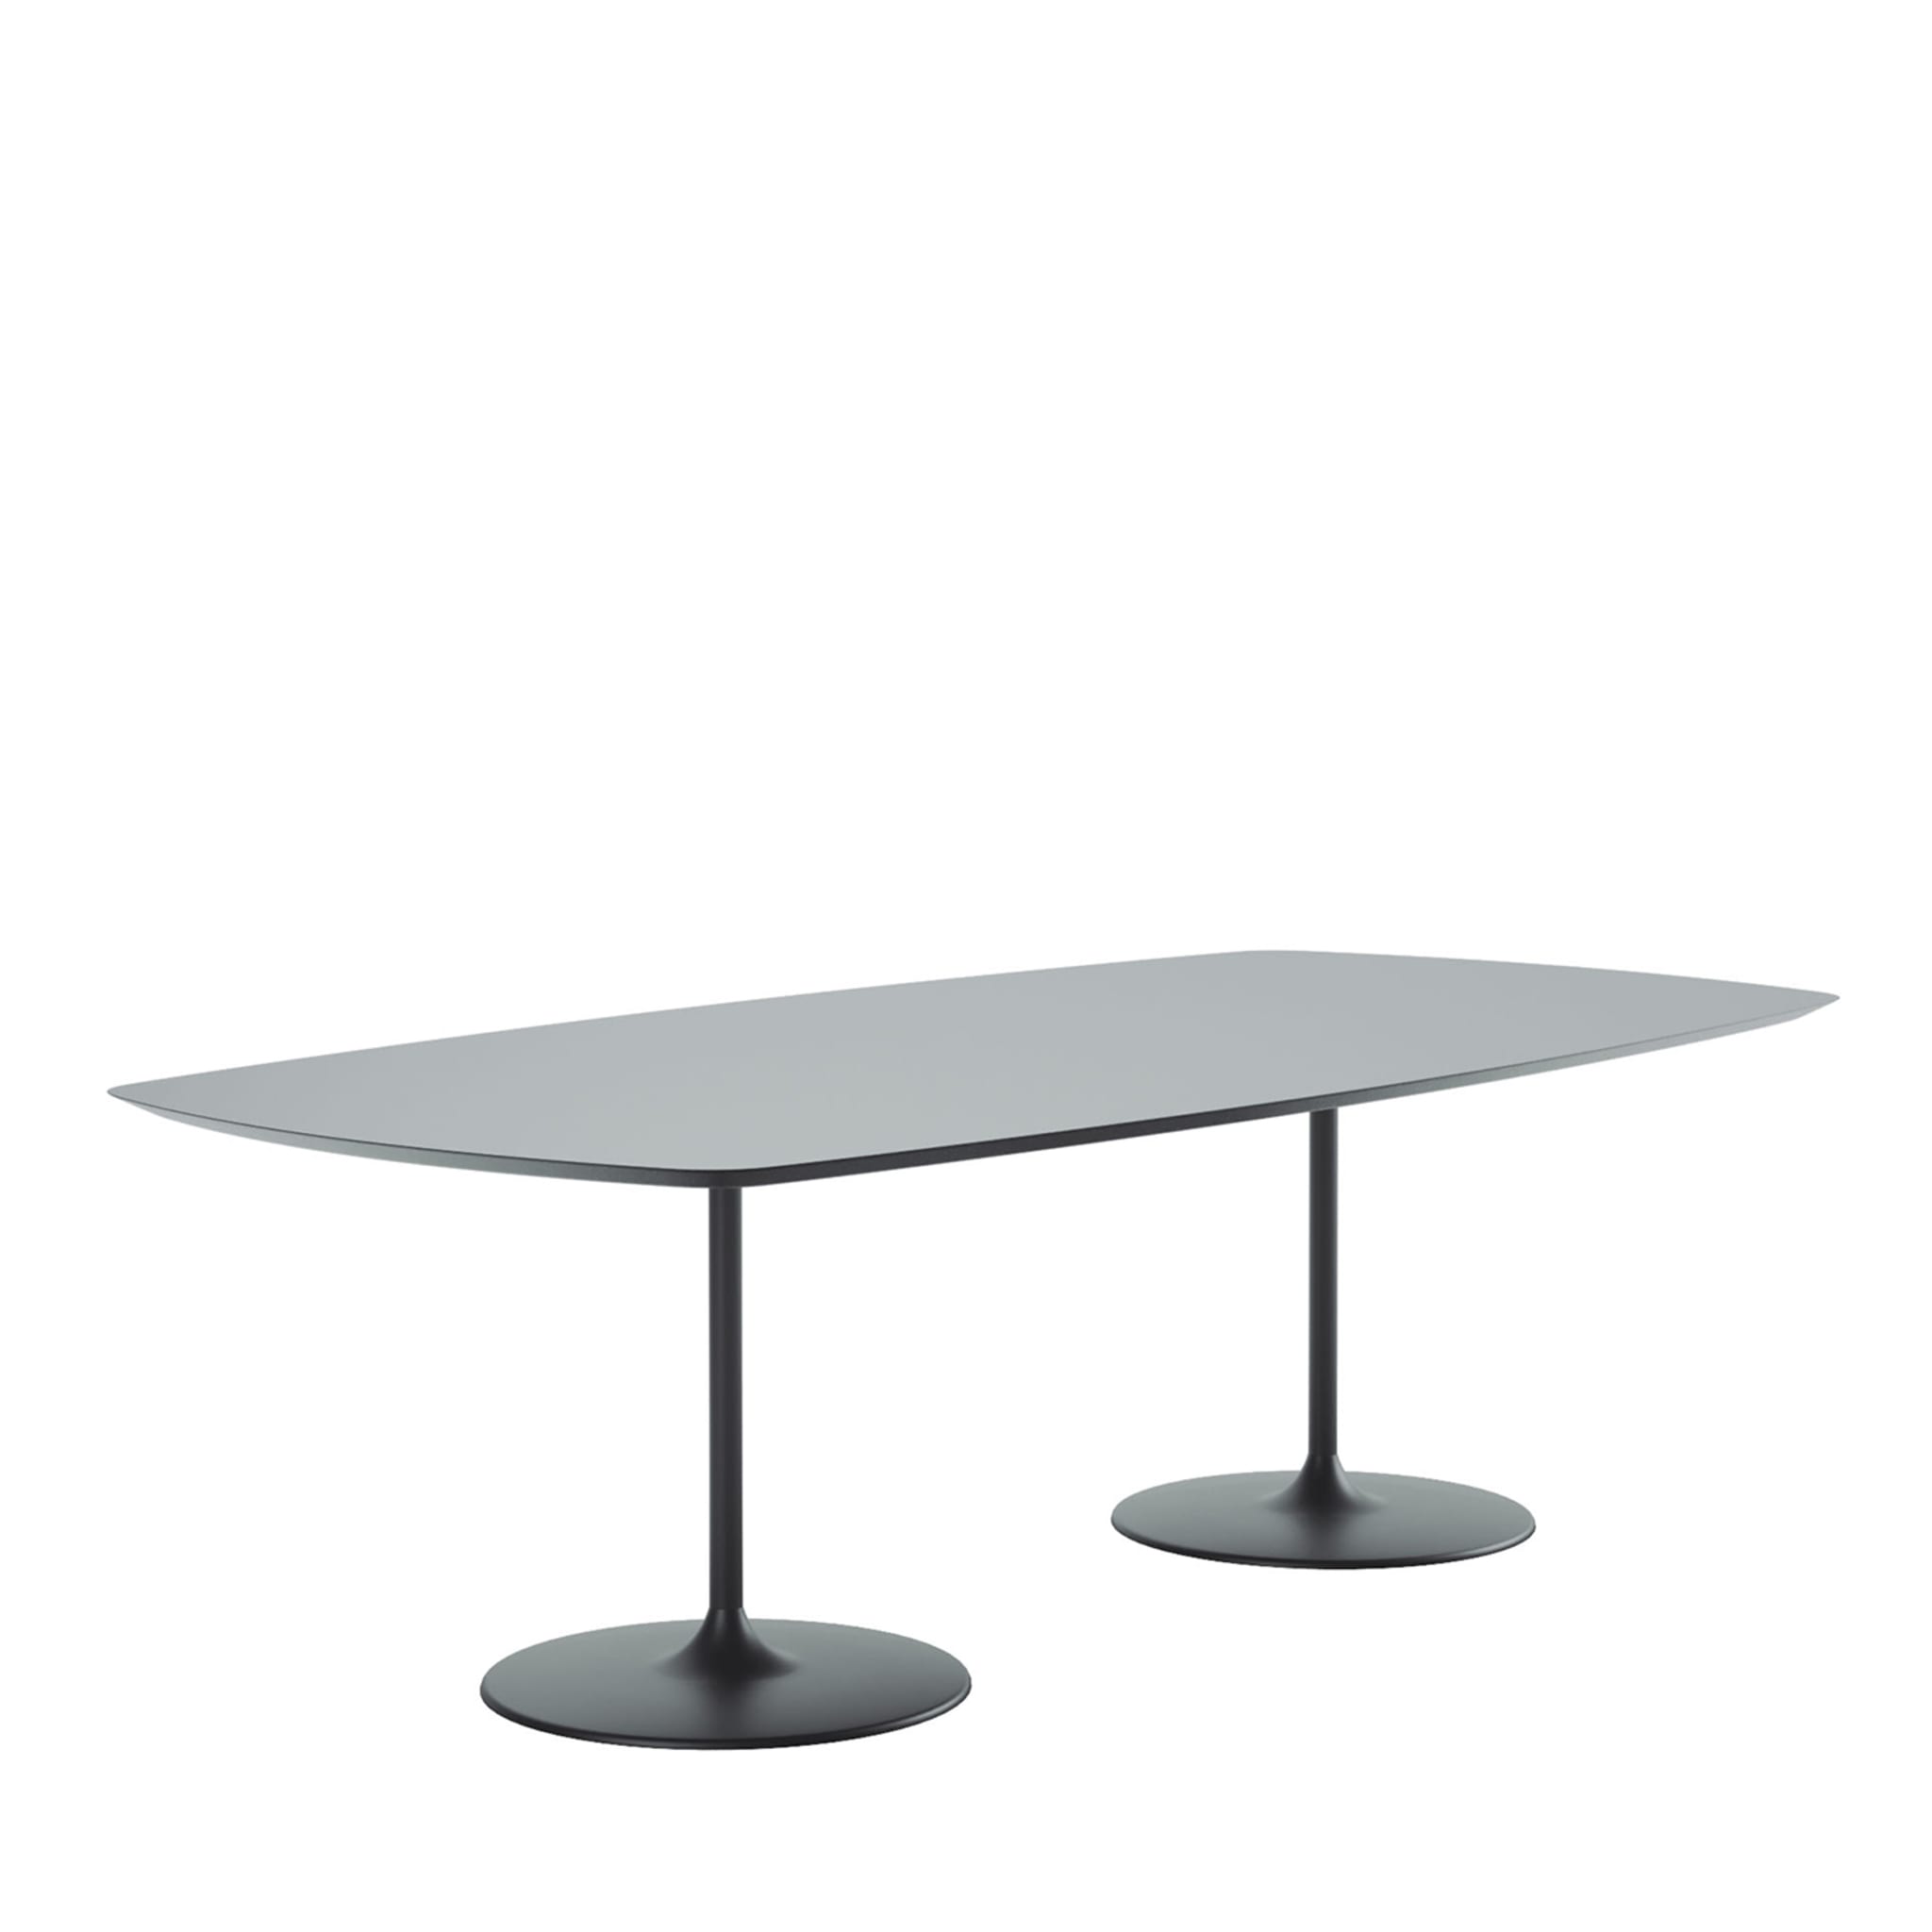 Malena Black Dining Table - Main view